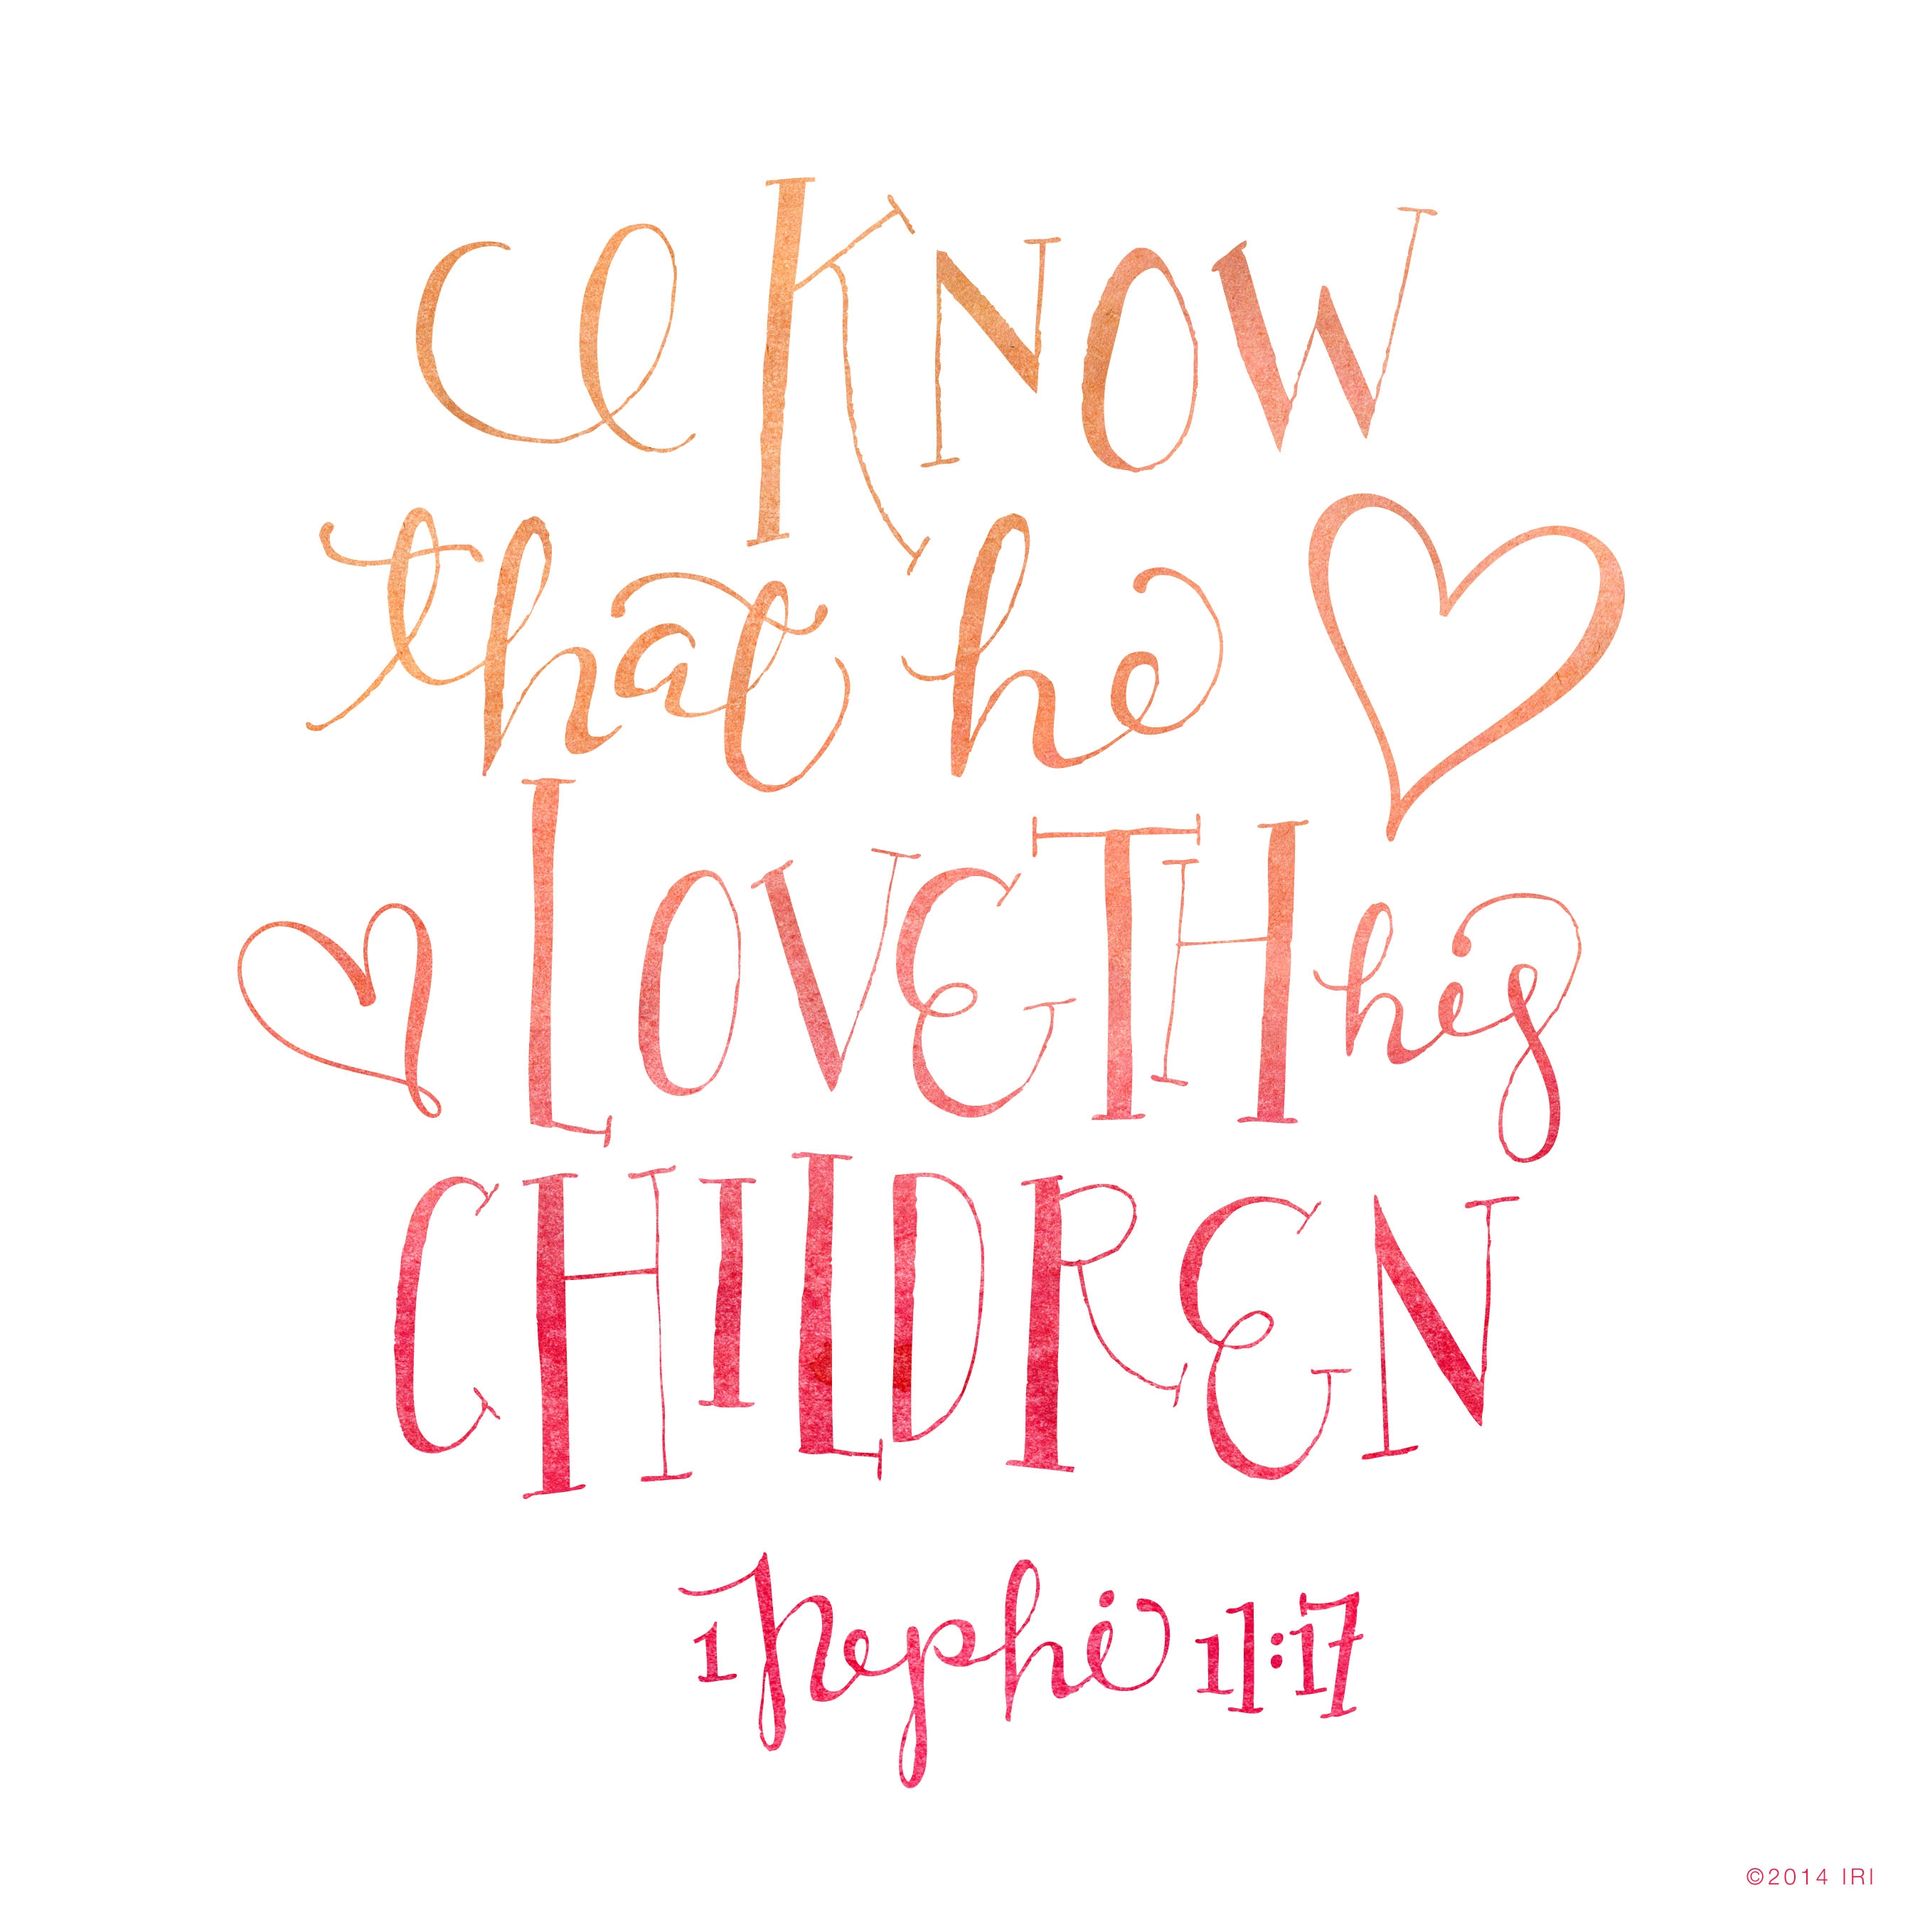 “I know that he loveth his children.”—1 Nephi 11:17